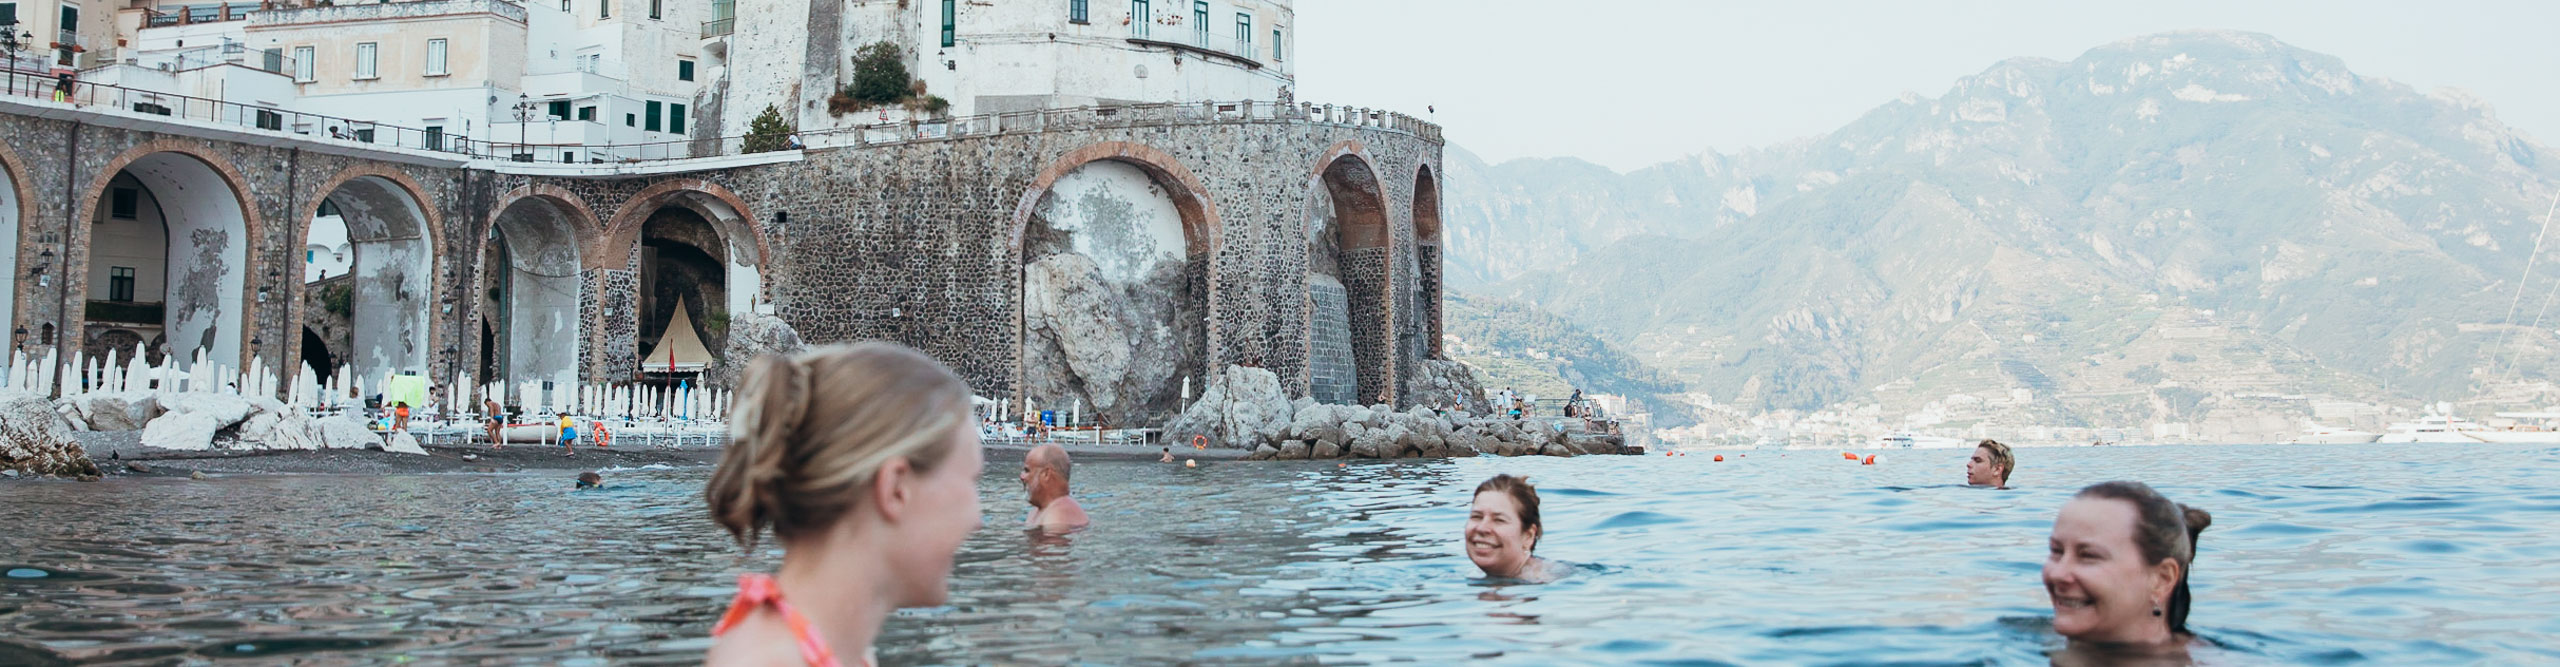 People swimming near to a fort in Italy 